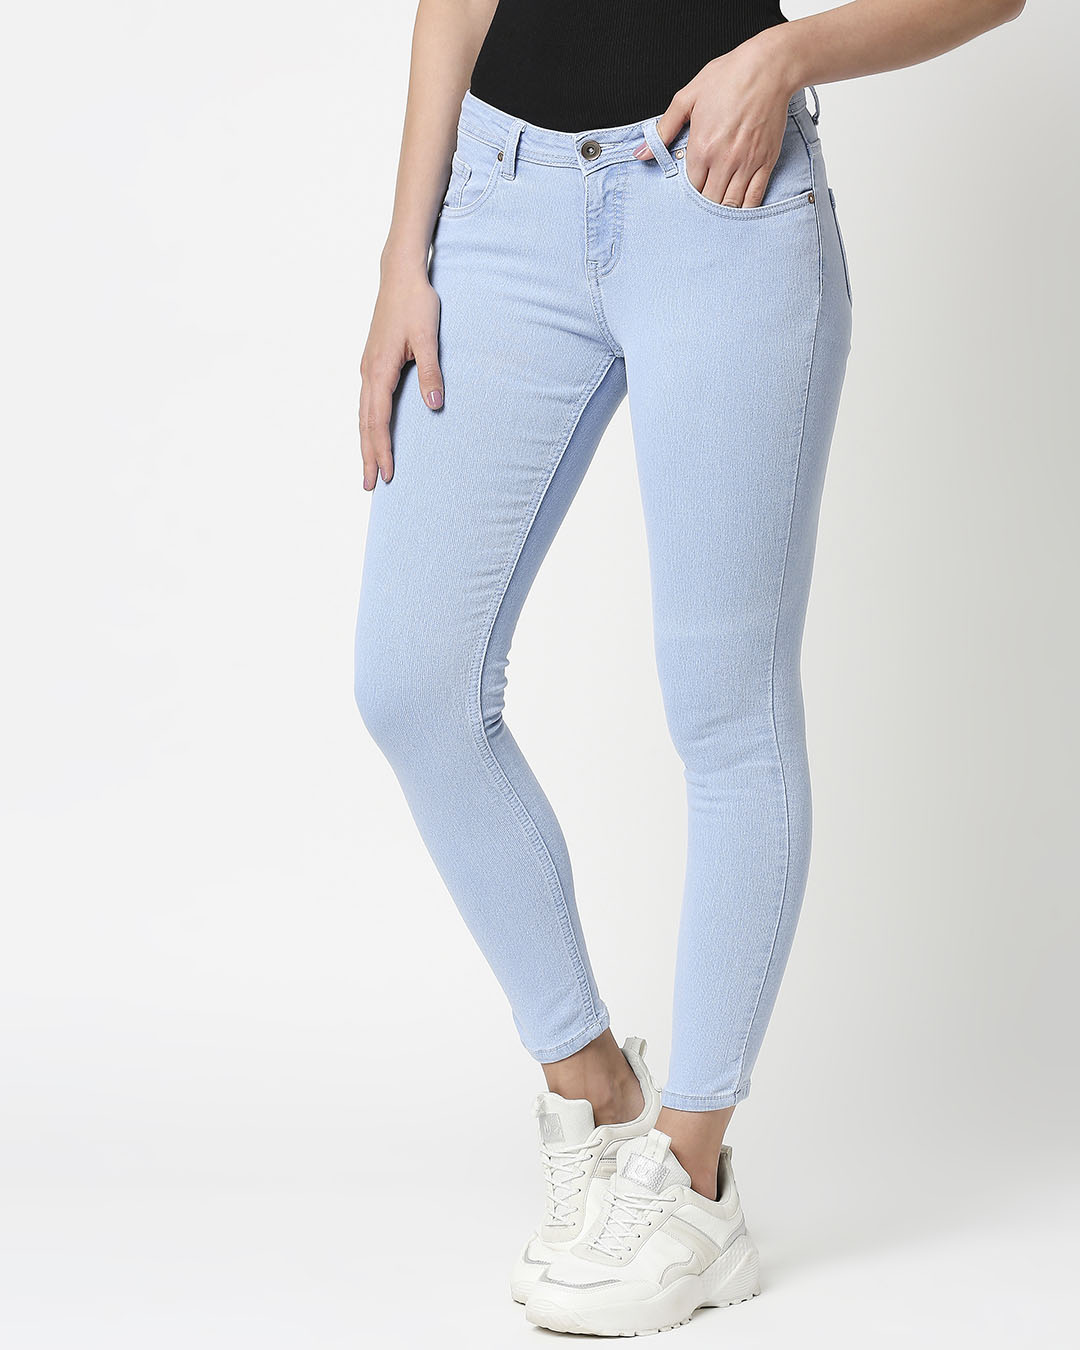 Shop Women's Blue Washed Slim Fit Mid Waist Jeans With Belt Loops-Back